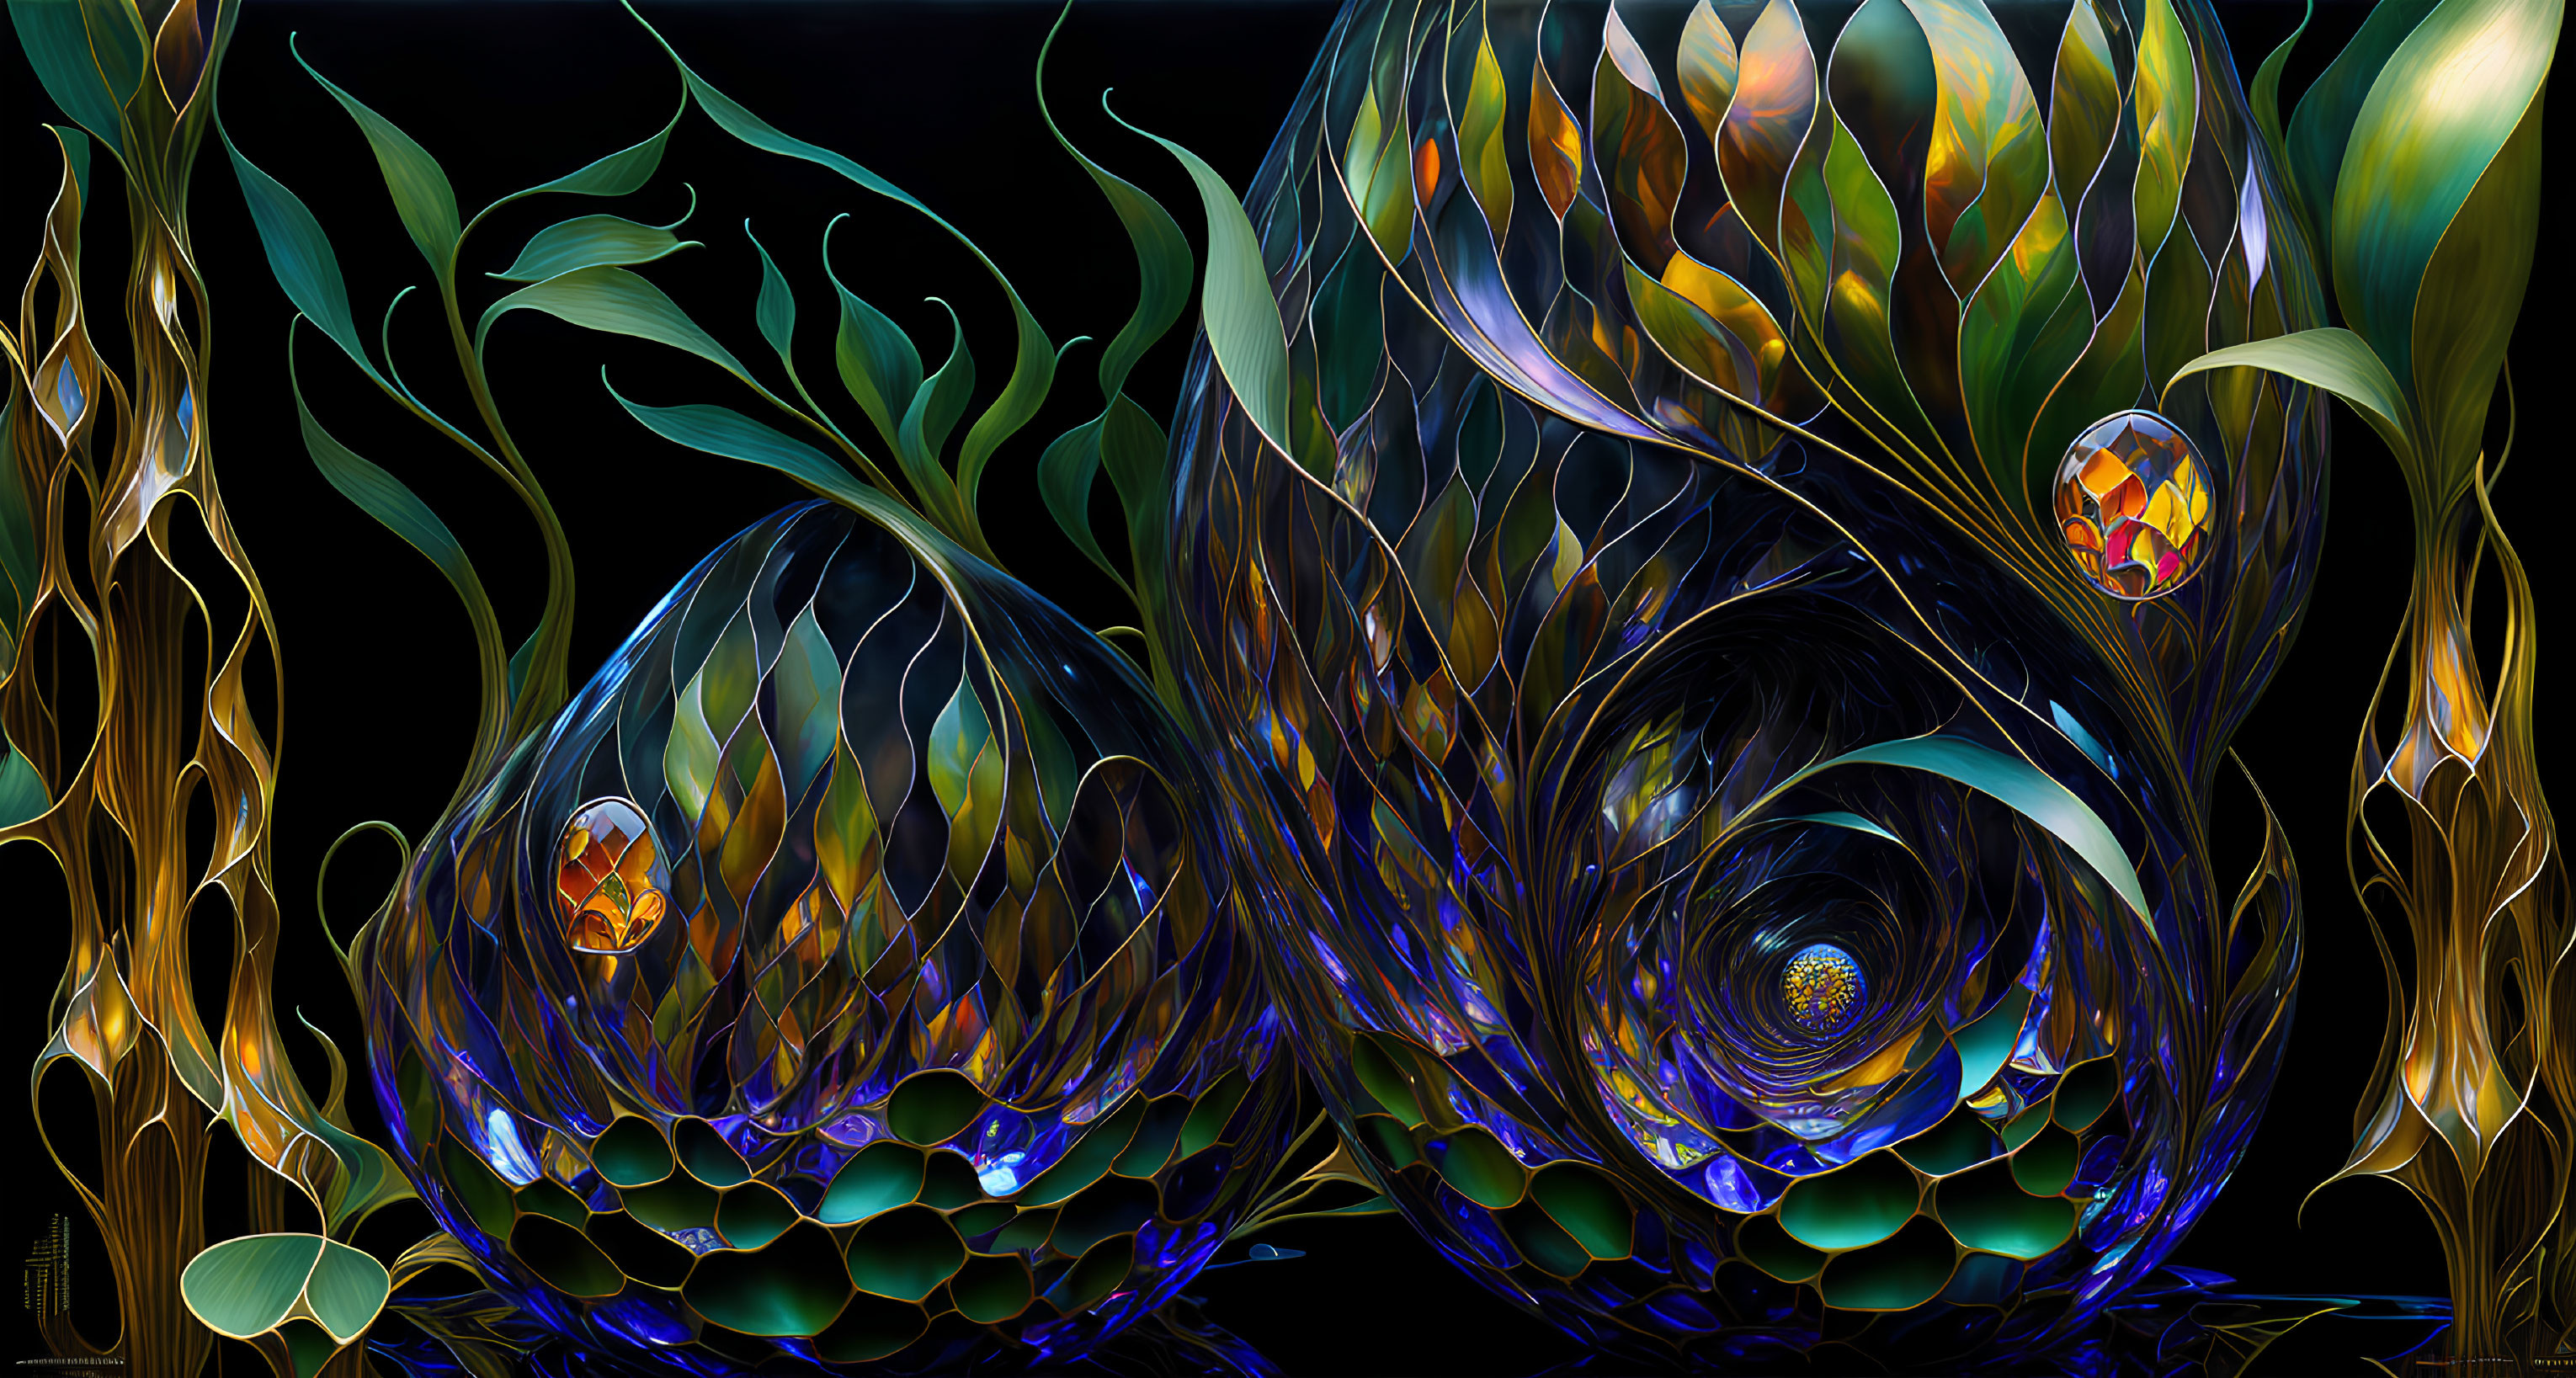 Vibrant abstract digital art with organic shapes and iridescent textures